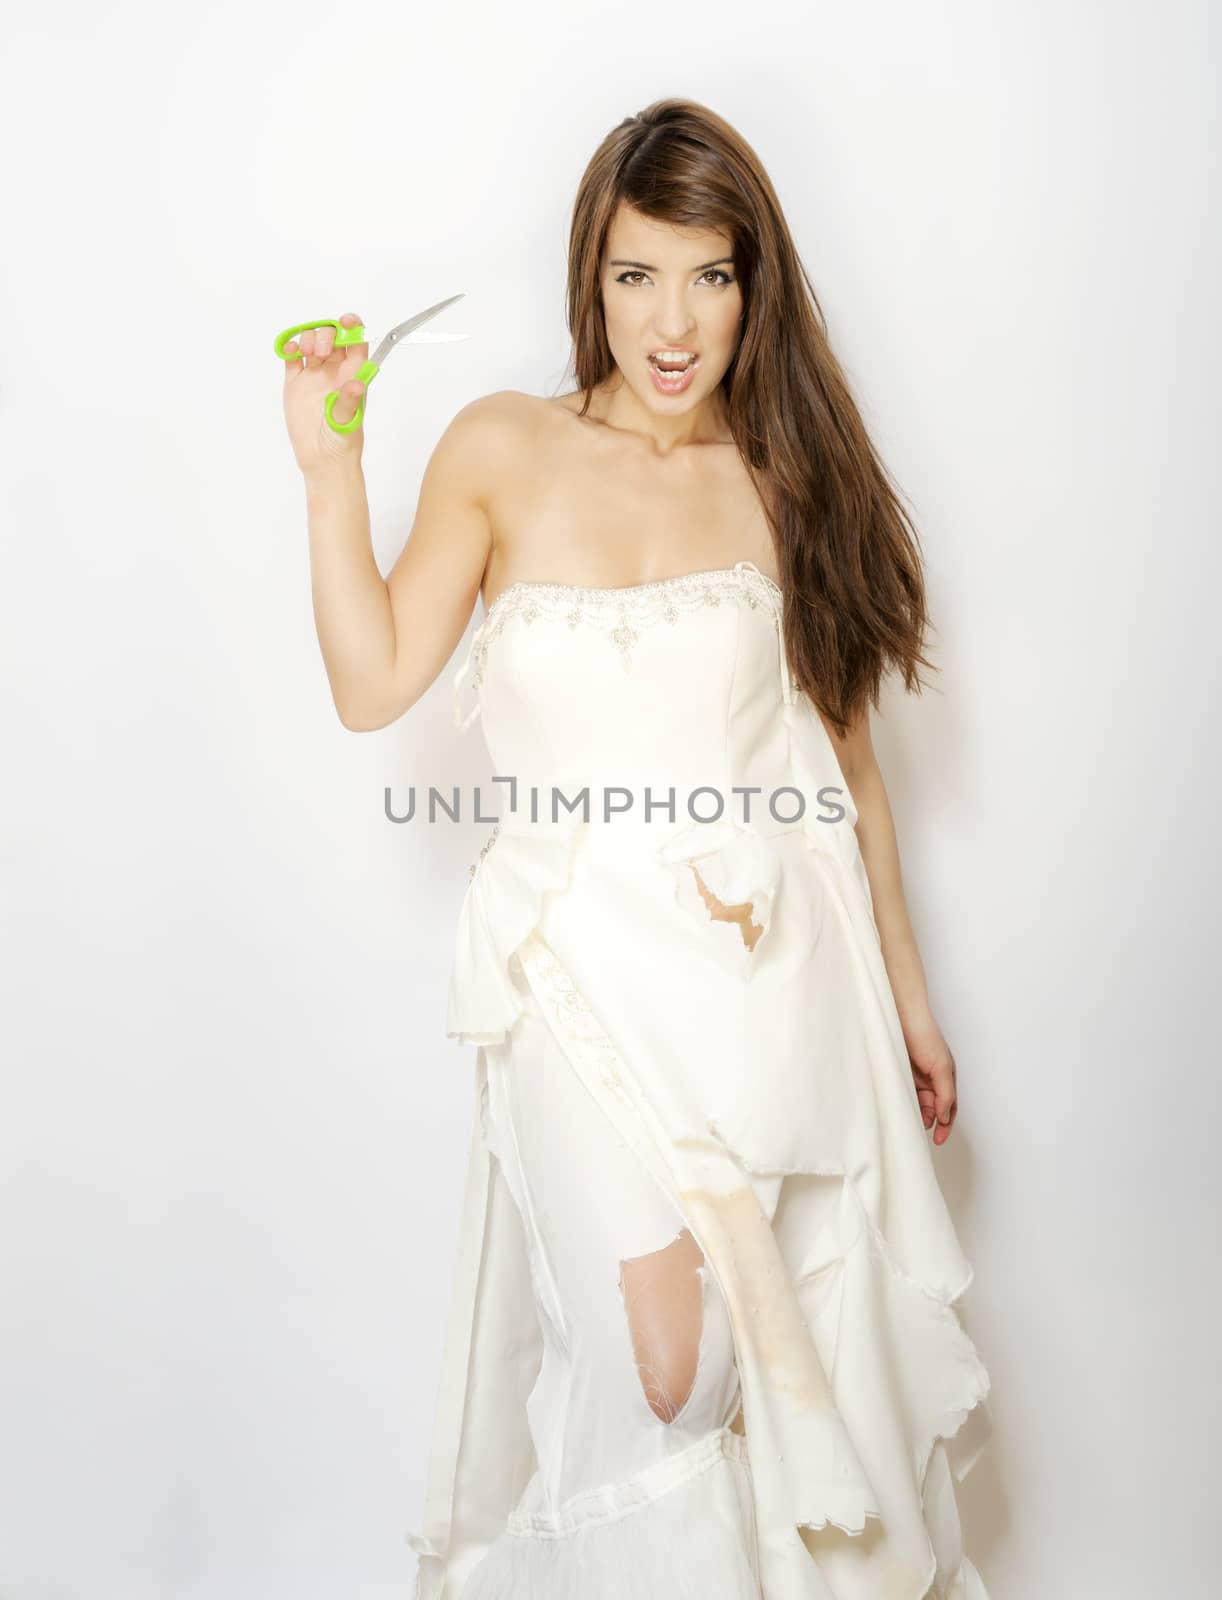 sexy woman in ripped and cut wedding dress holding scissors